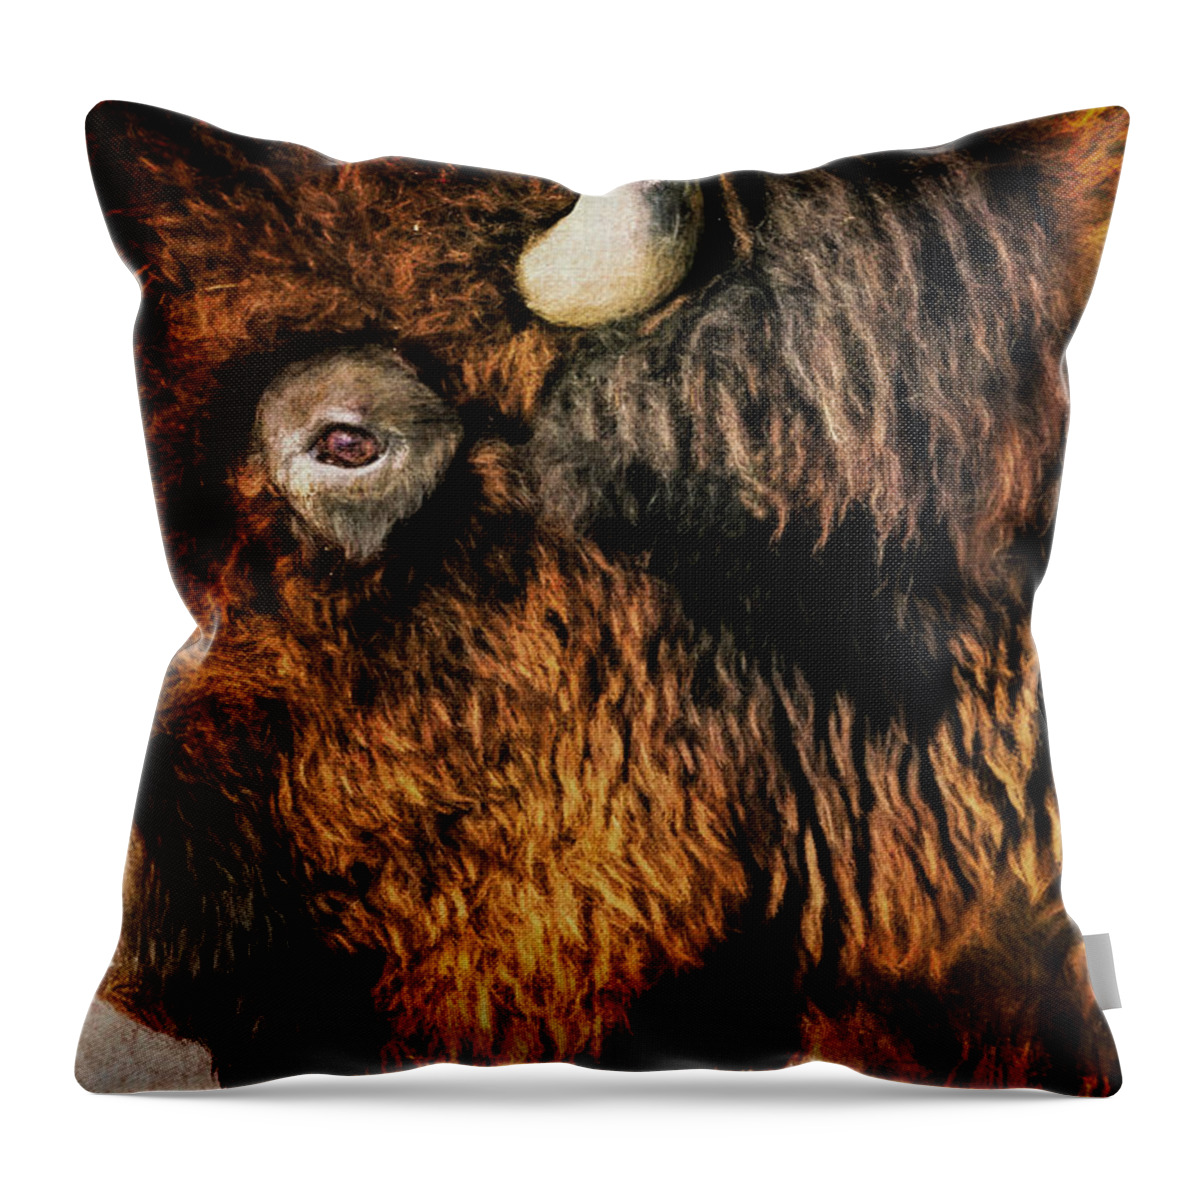 Bison Throw Pillow featuring the photograph American Bison by Anna Louise